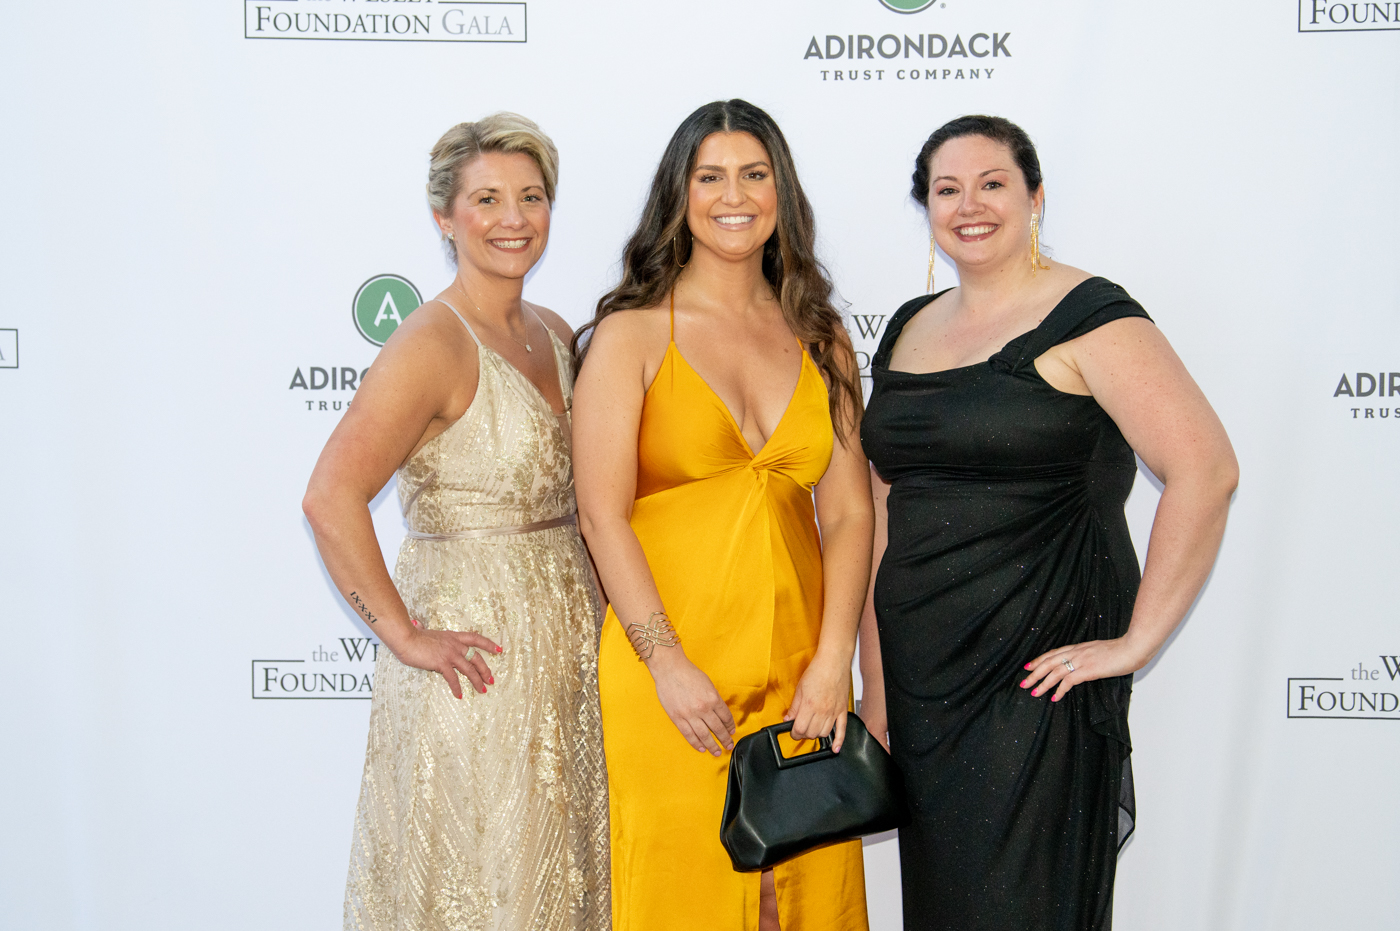 A set of three women posing, from left to right wearing a gold dress, a gold dress and a black dress